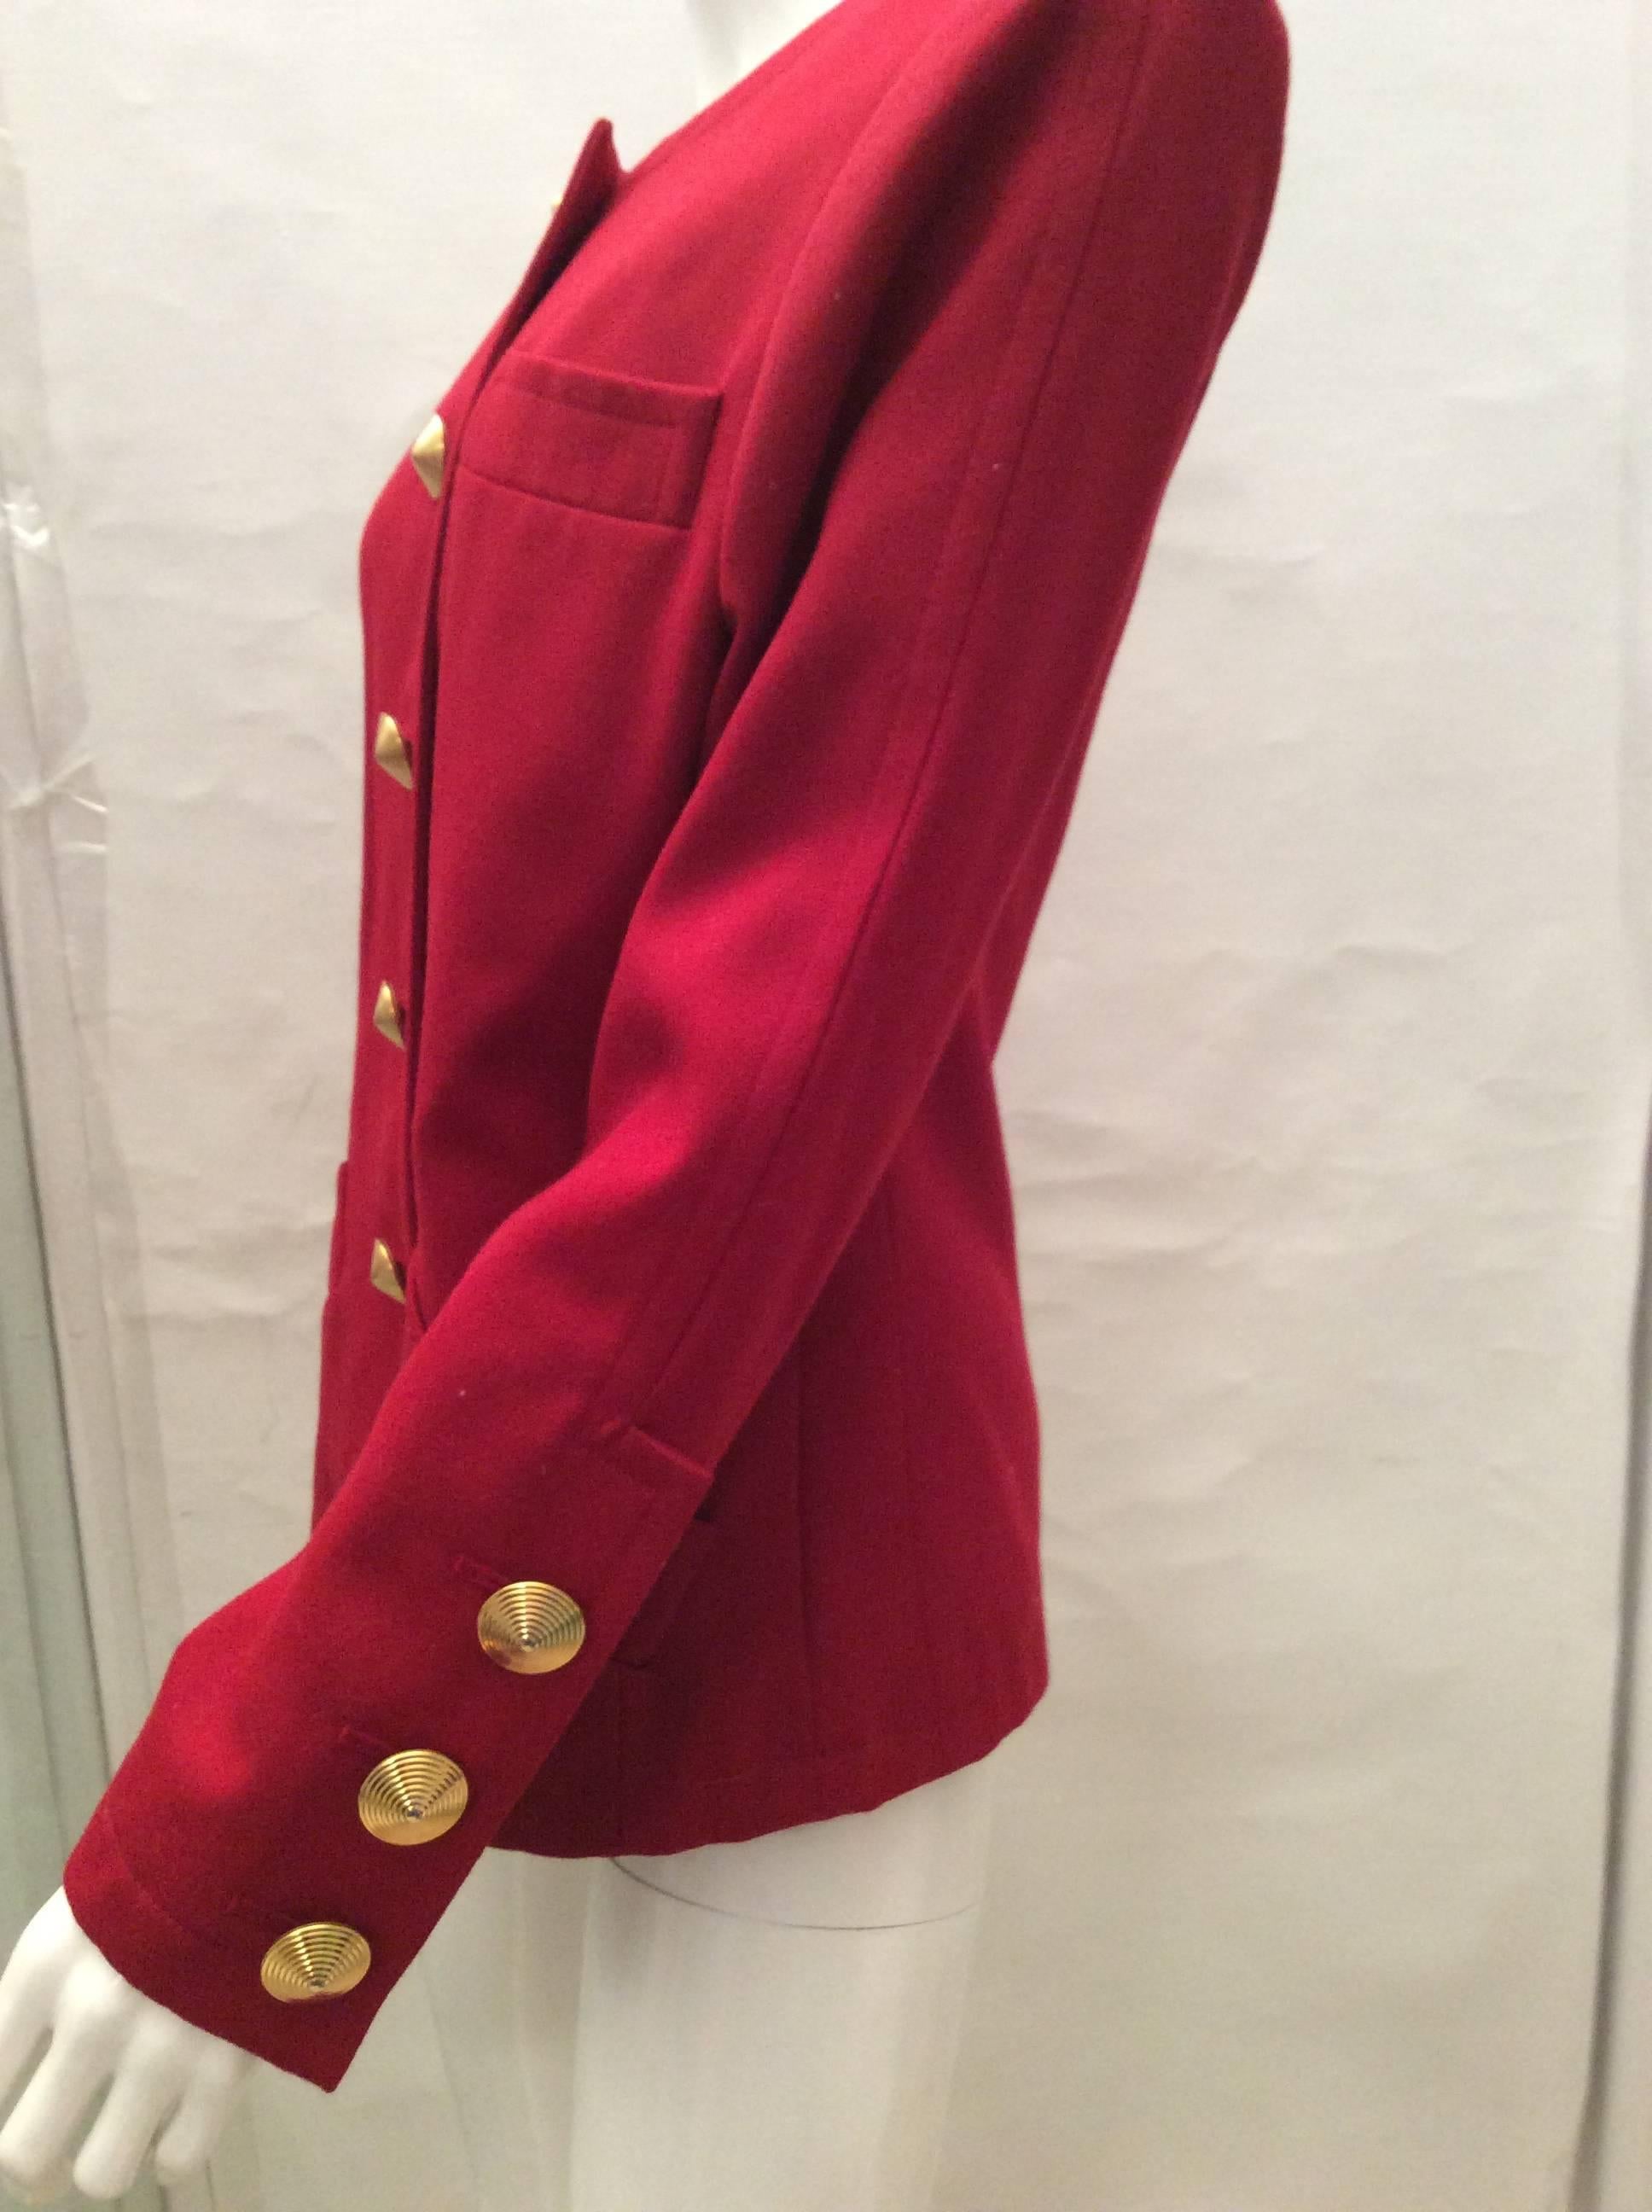 Yves Saint Laurent Red Blazer - Fab Buttons - 1980's In Excellent Condition For Sale In Boca Raton, FL